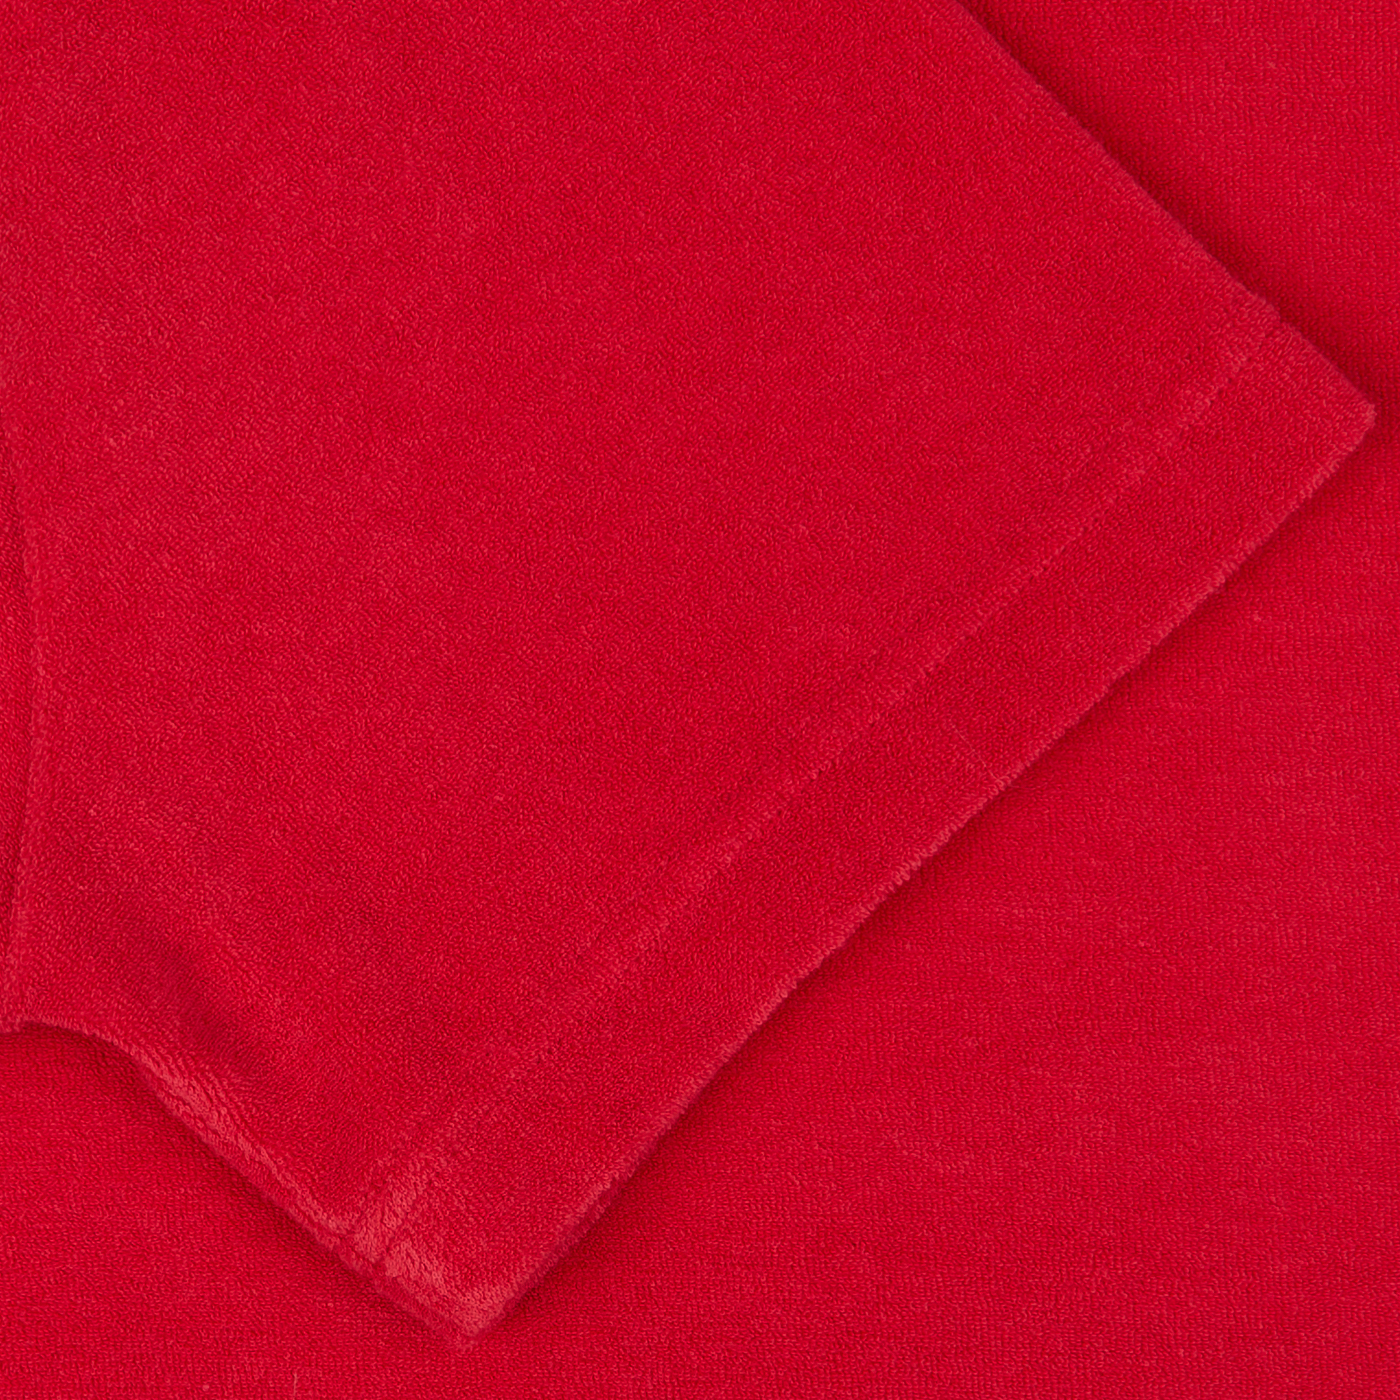 A coral red organic cotton towelling fabric or textile with a smooth texture laid out flat.